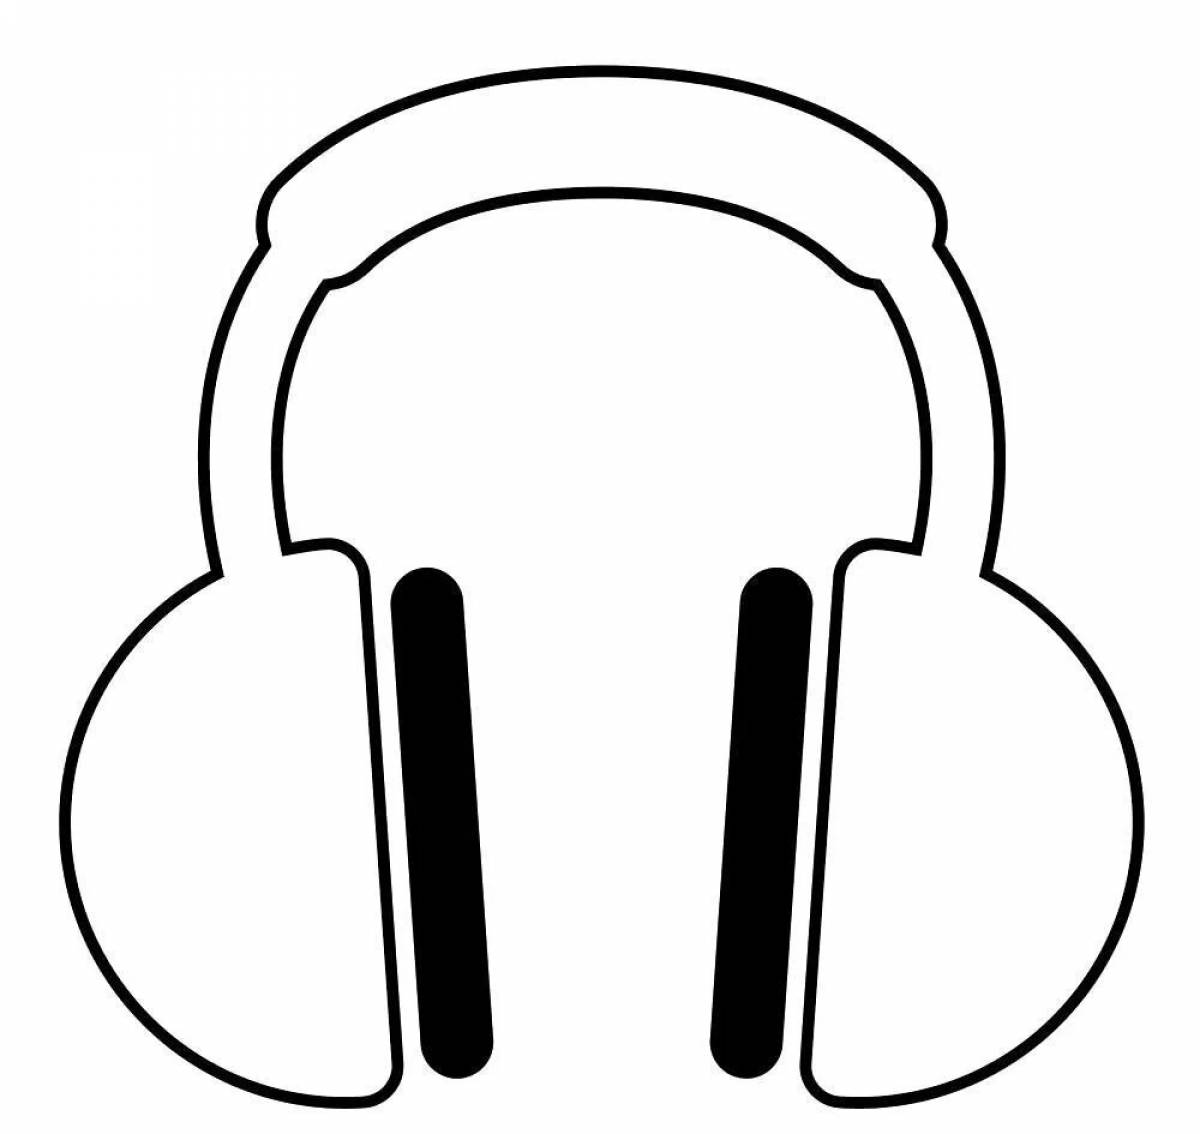 Multicolor coloring pages with headphones for preschoolers